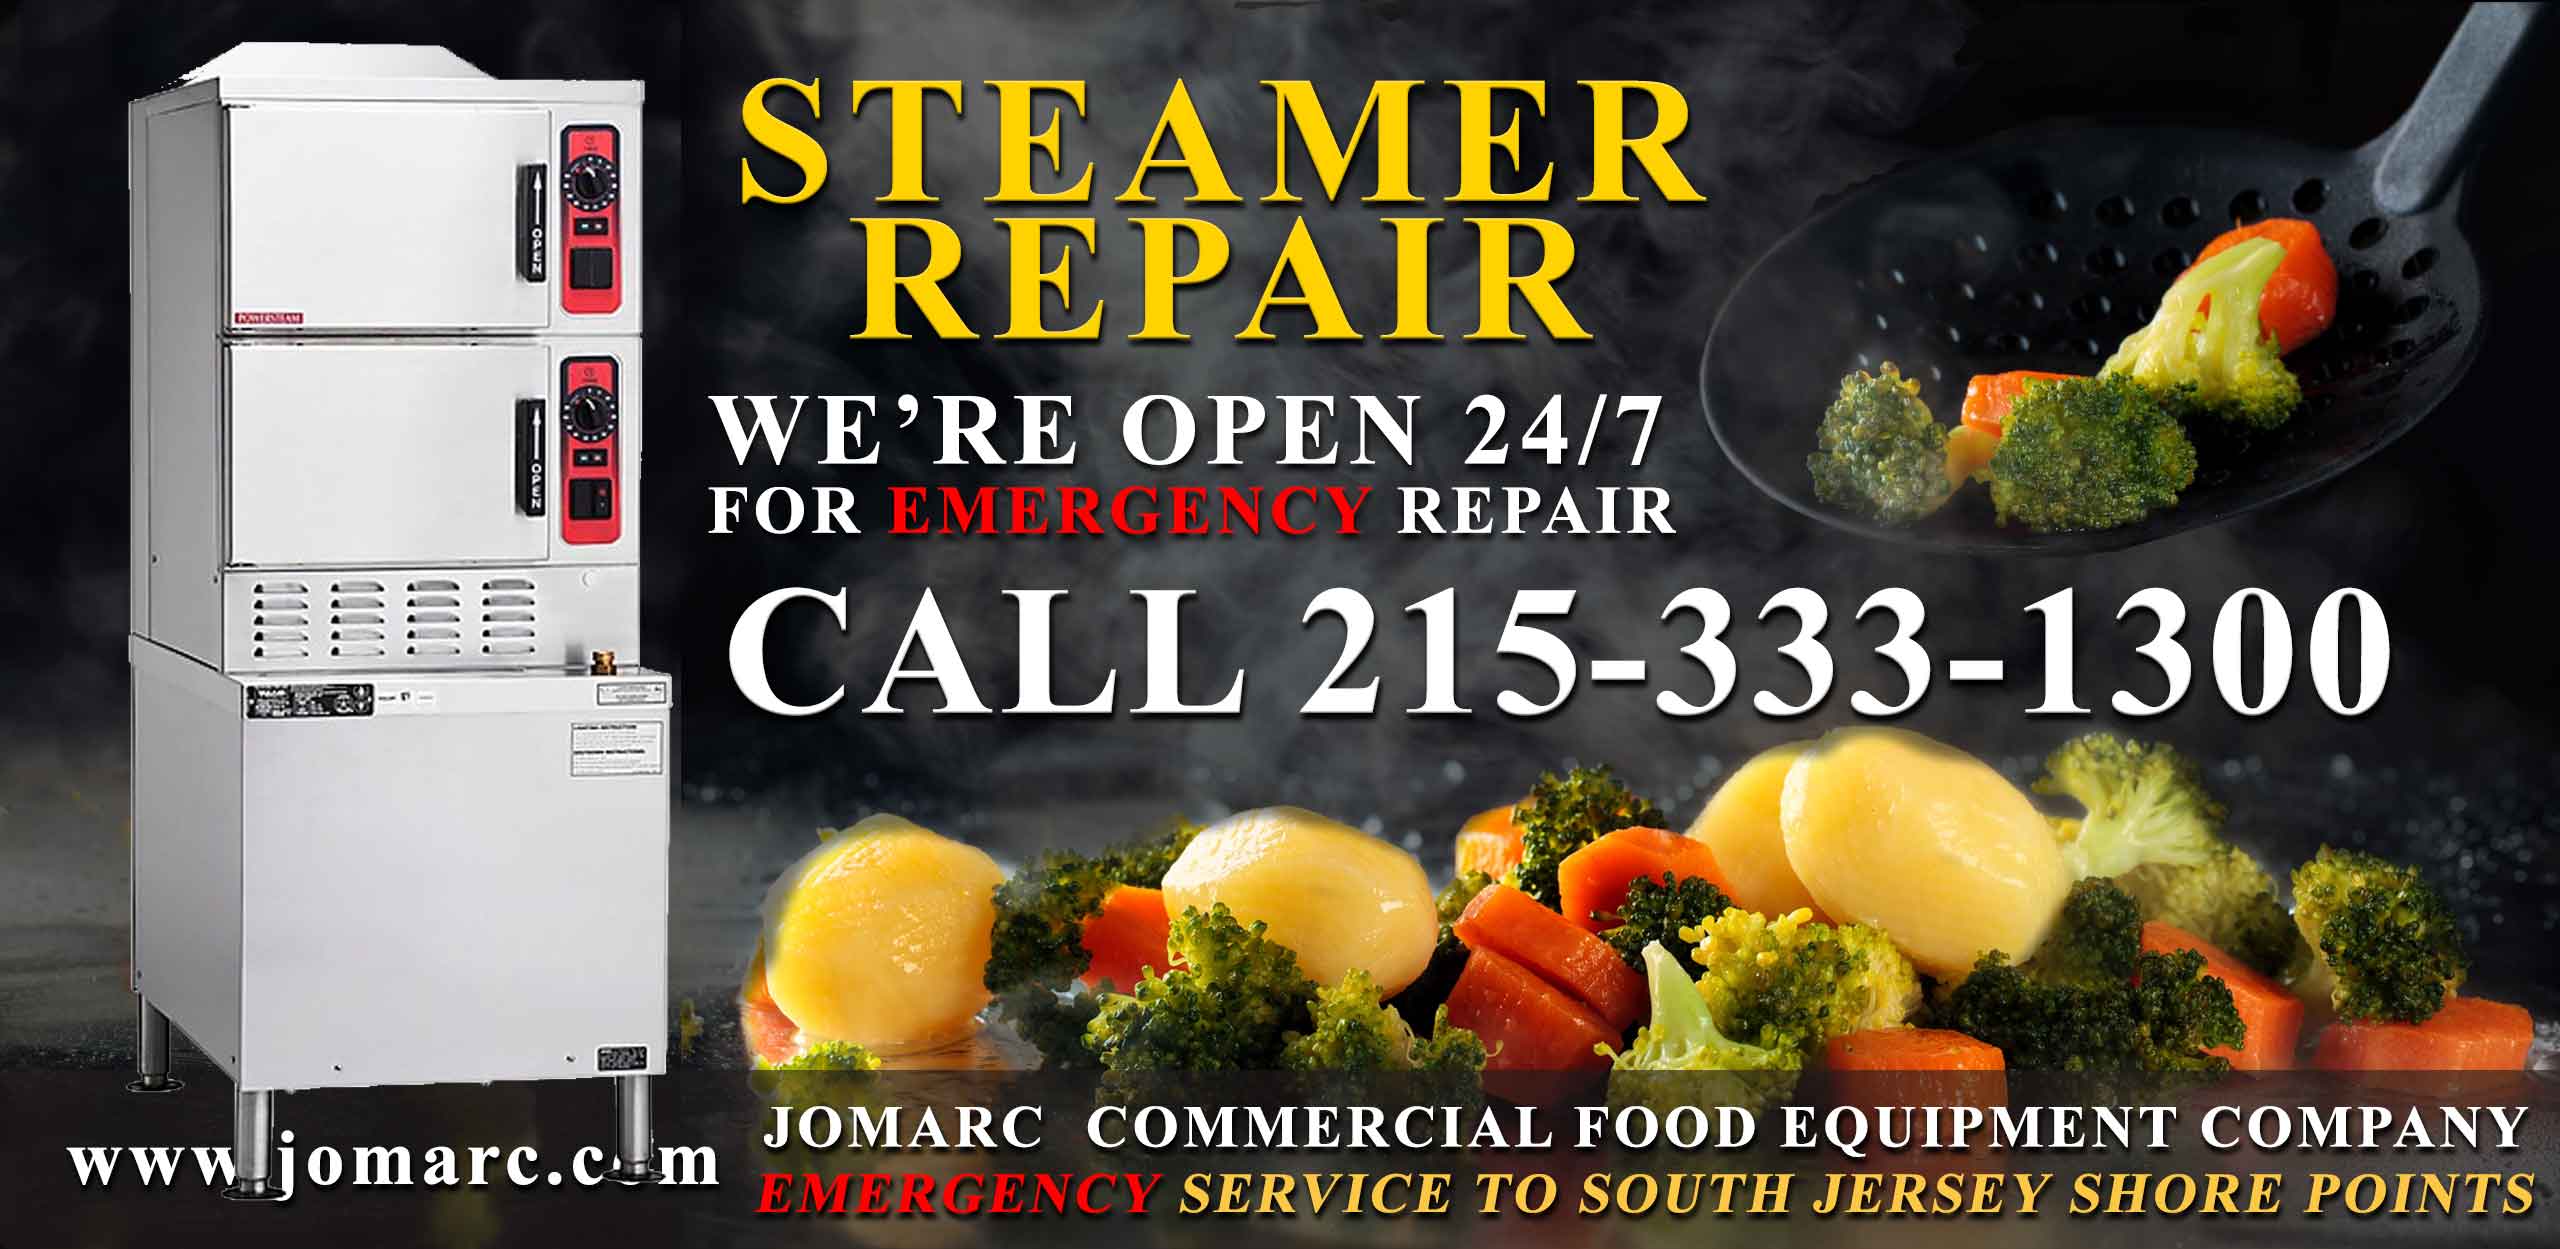 Commercial Food Equipment Repair New Jersey Atlantic County Cape May Hobart Dough Mixer Repair Pizza Oven Dishwashers Ovens Fryers Slicers Steamers 